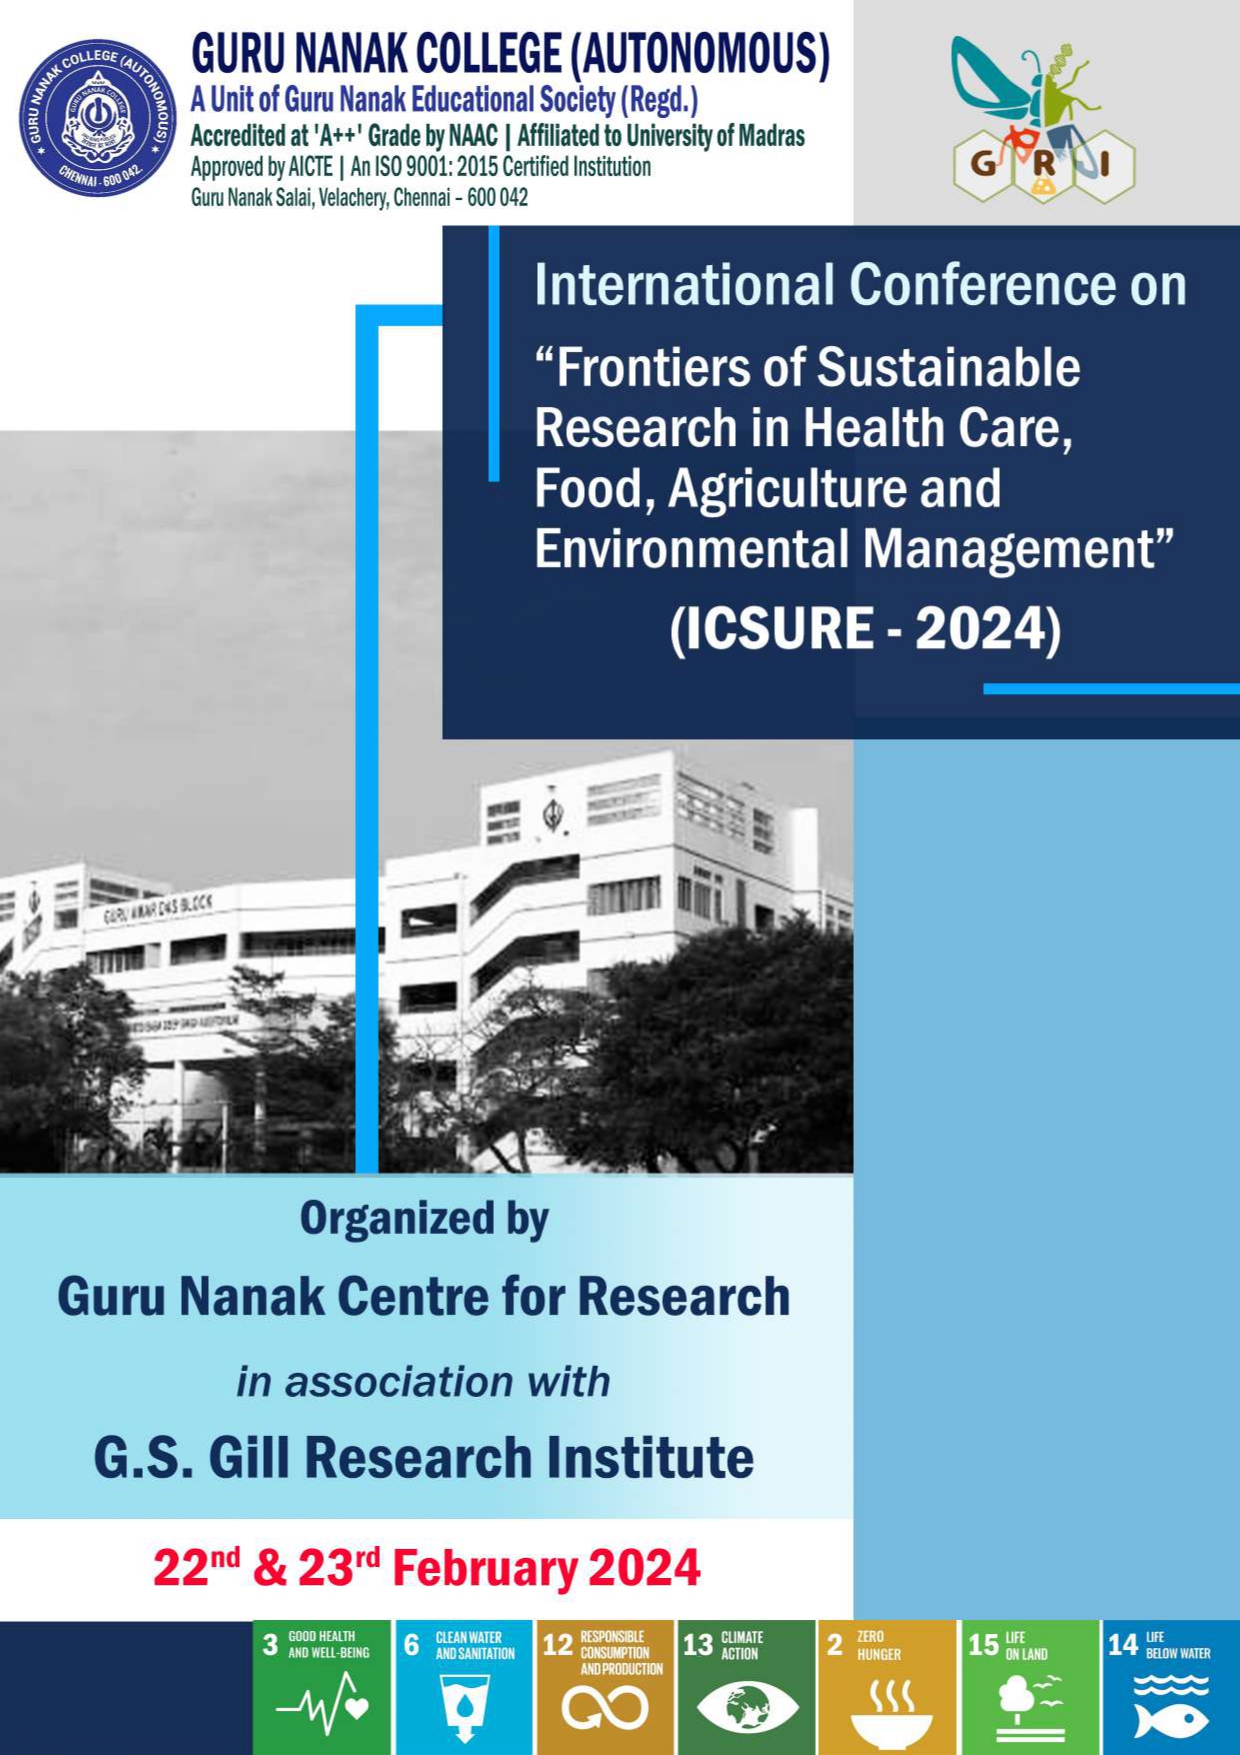 International Conference on "Frontiers of Sustainable Research in Health Care, Food, Agriculture and Environmental Management" (ICSURE - 2024) organised by   GNCR in association with GRI